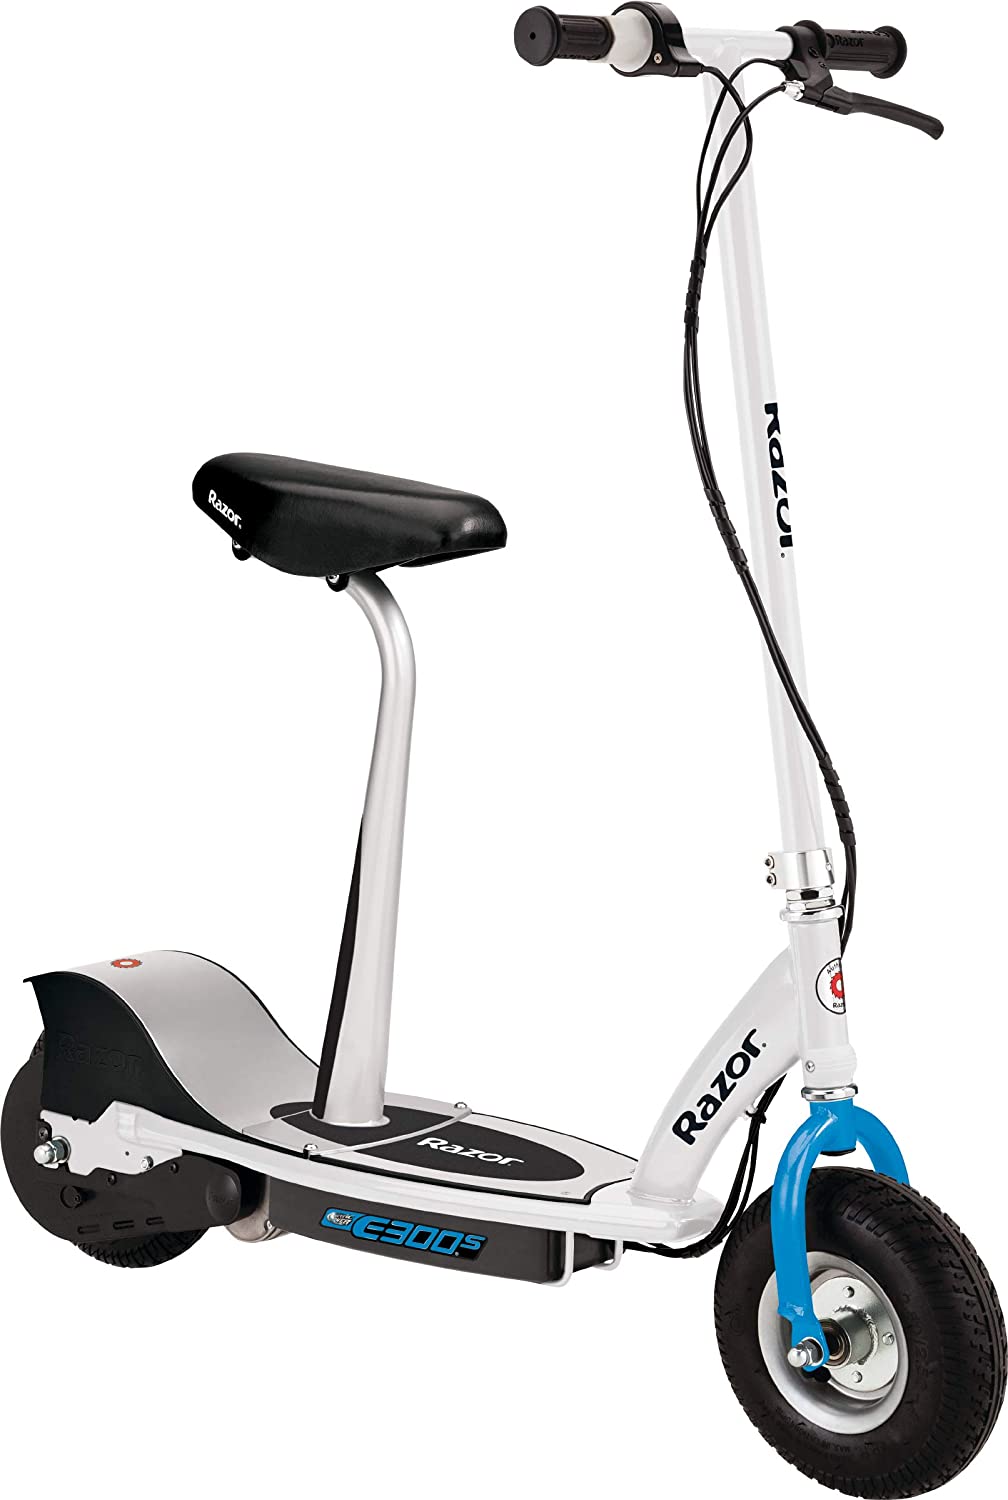 Razor E300s 24V Seated Electric Scooter (White/Blue, up to 220-lbs) $149 + Free Shipping